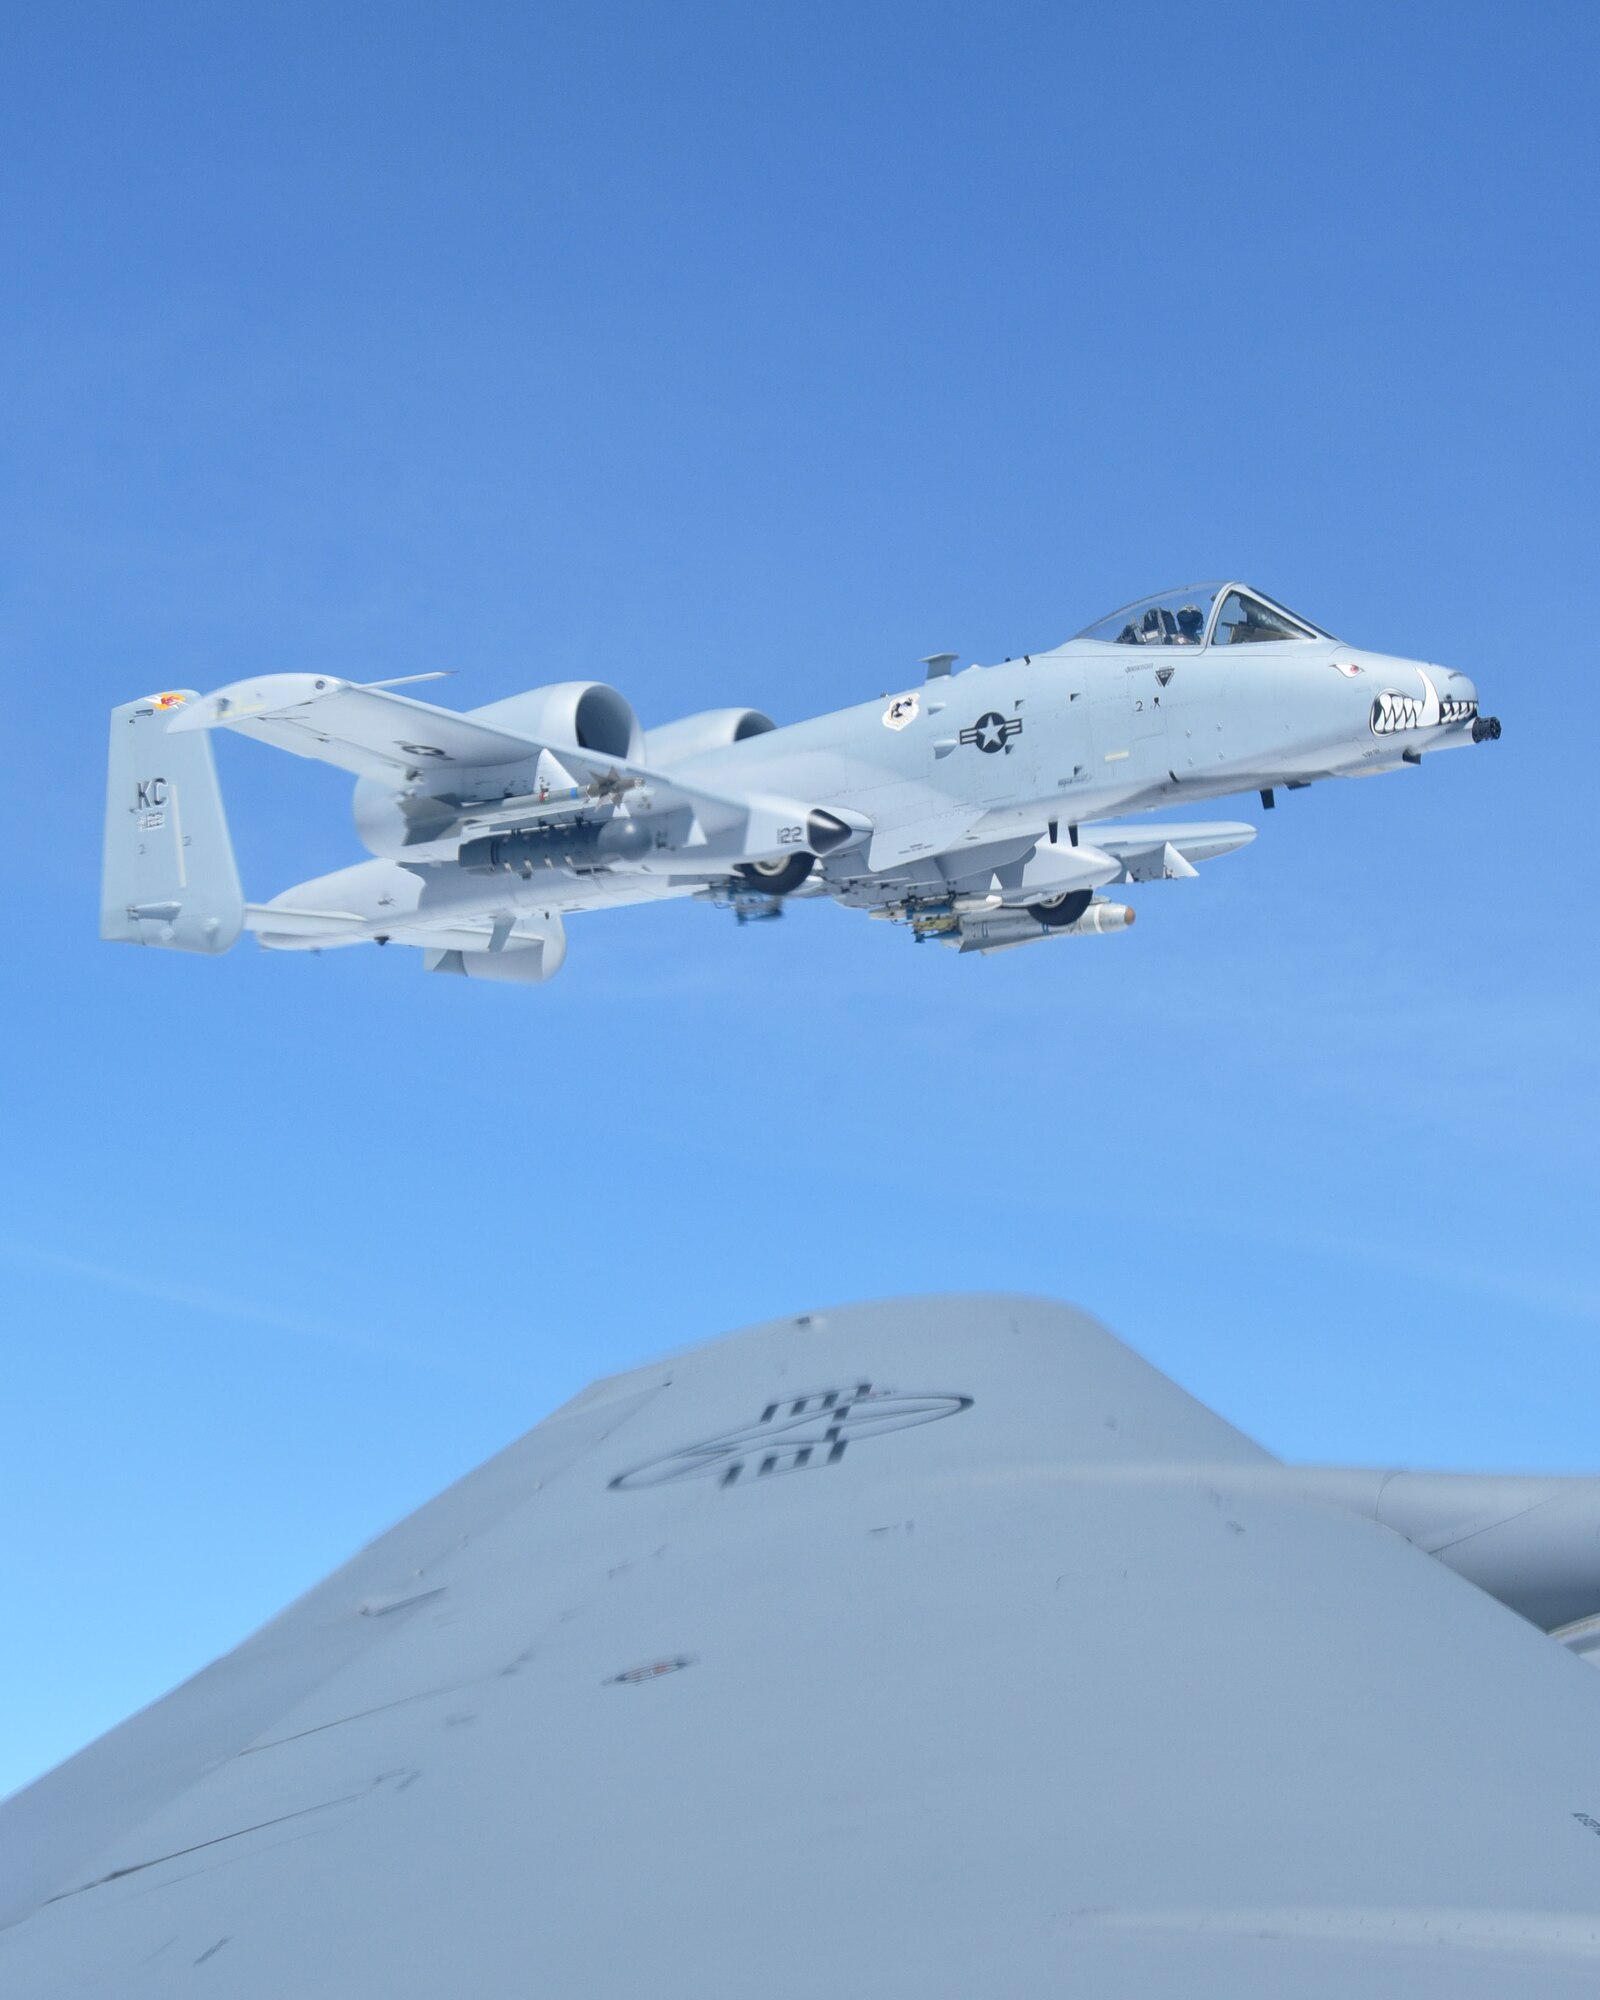 An A-10 Thunderbolt from the 442nd Fighter Wing at Whiteman AFB, Mo., flys close to the wing of a KC-135 Stratotanker assigned to McConnell Air Force Base, Kan., during a "Bosslift" sponsored by the local Employer Support of the Guard and Reserve, Aug. 3, 2019.  During the flight, ten civilian employers of 931st Air Refueling Wing Traditional Reservists observed the aerial refueling of the A-10s by a 931 ARW aircrew.